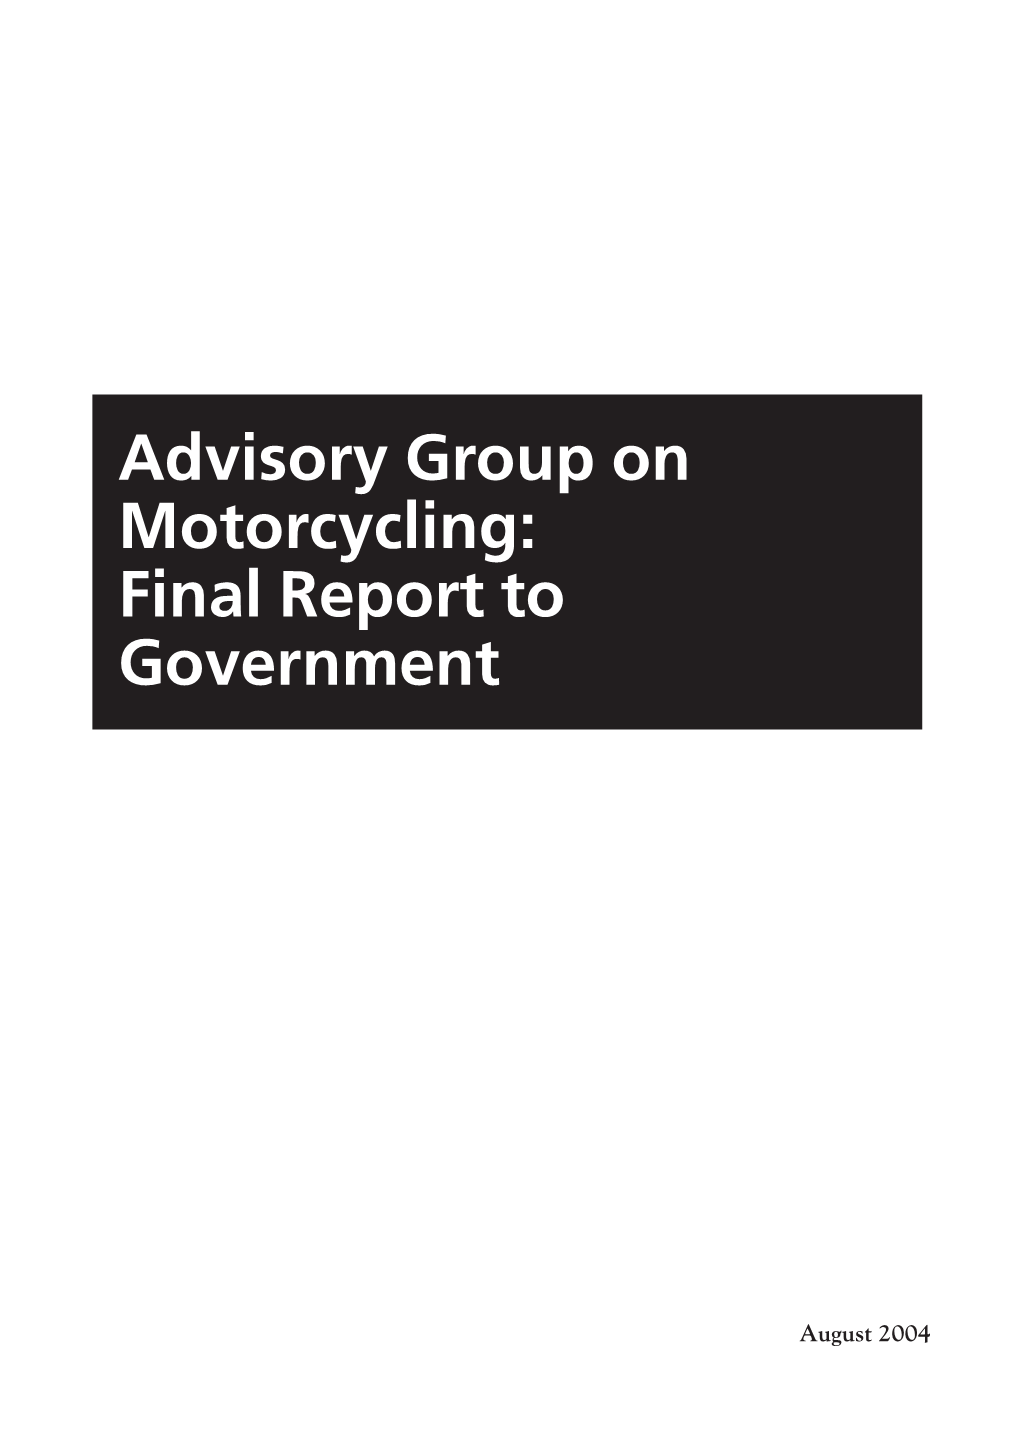 Advisory Group on Motorcycling: Final Report to Government